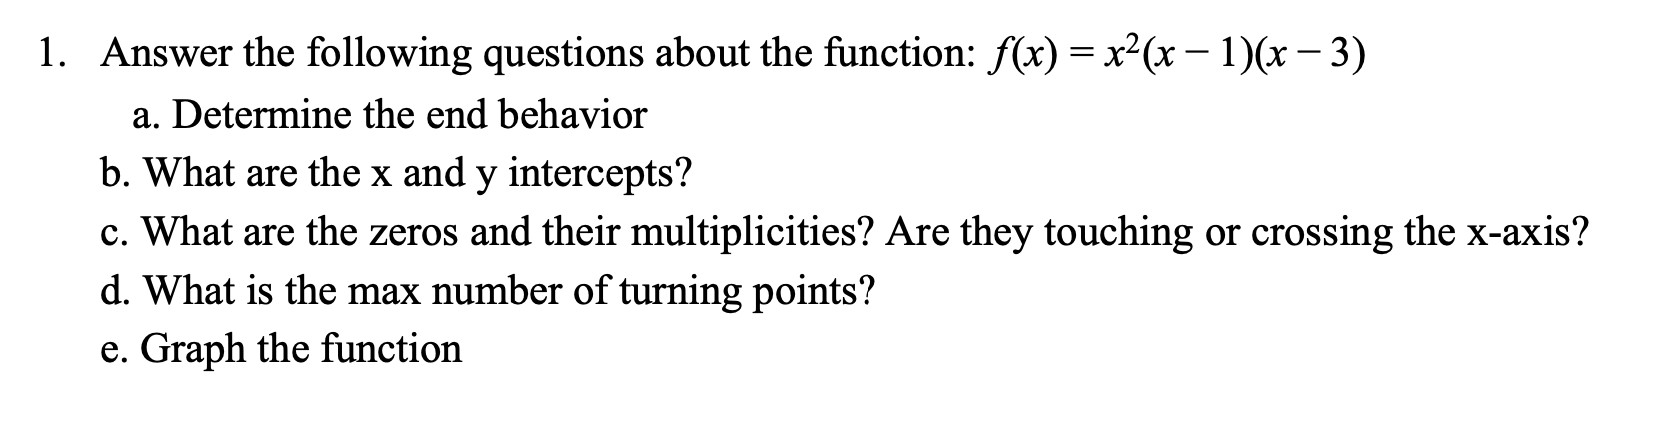 1. Answer the following questions about the function: f(x) x2(x-1)(x-3)
=
a. Determine the end behavior
b. What are the x and y intercepts?
c. What are the zeros and their multiplicities? Are they touching or crossing the x-axis?
d. What is the max number of turning points?
e. Graph the function
